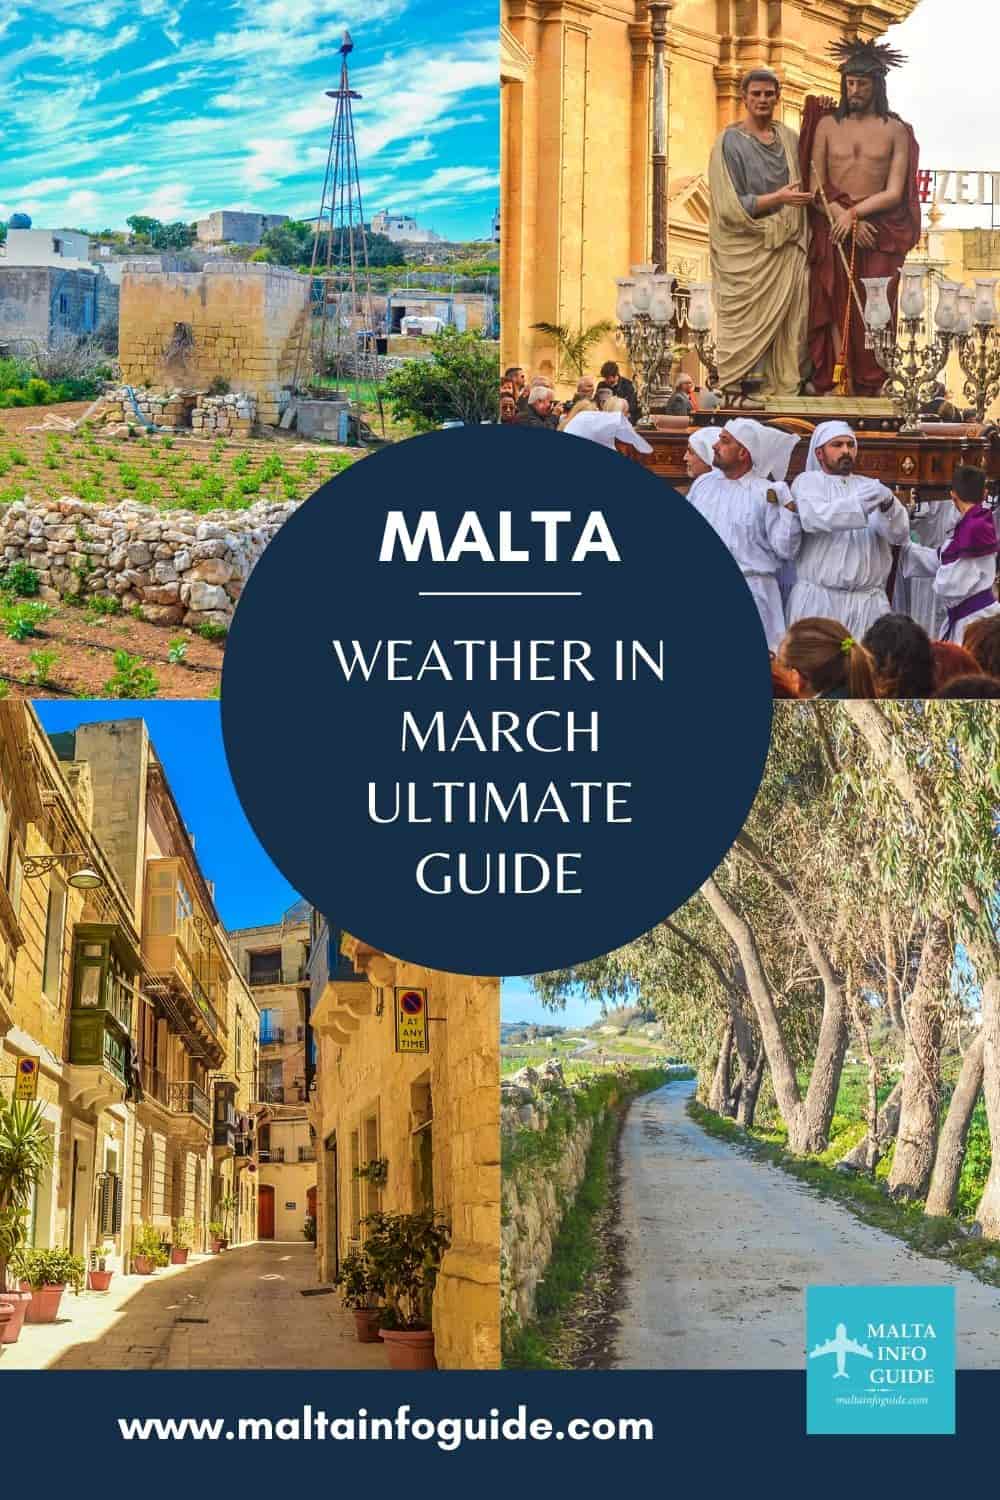 The weather is getting hotter but still cold with more enjoyable sunny days. The weather in Malta in March is already changing.